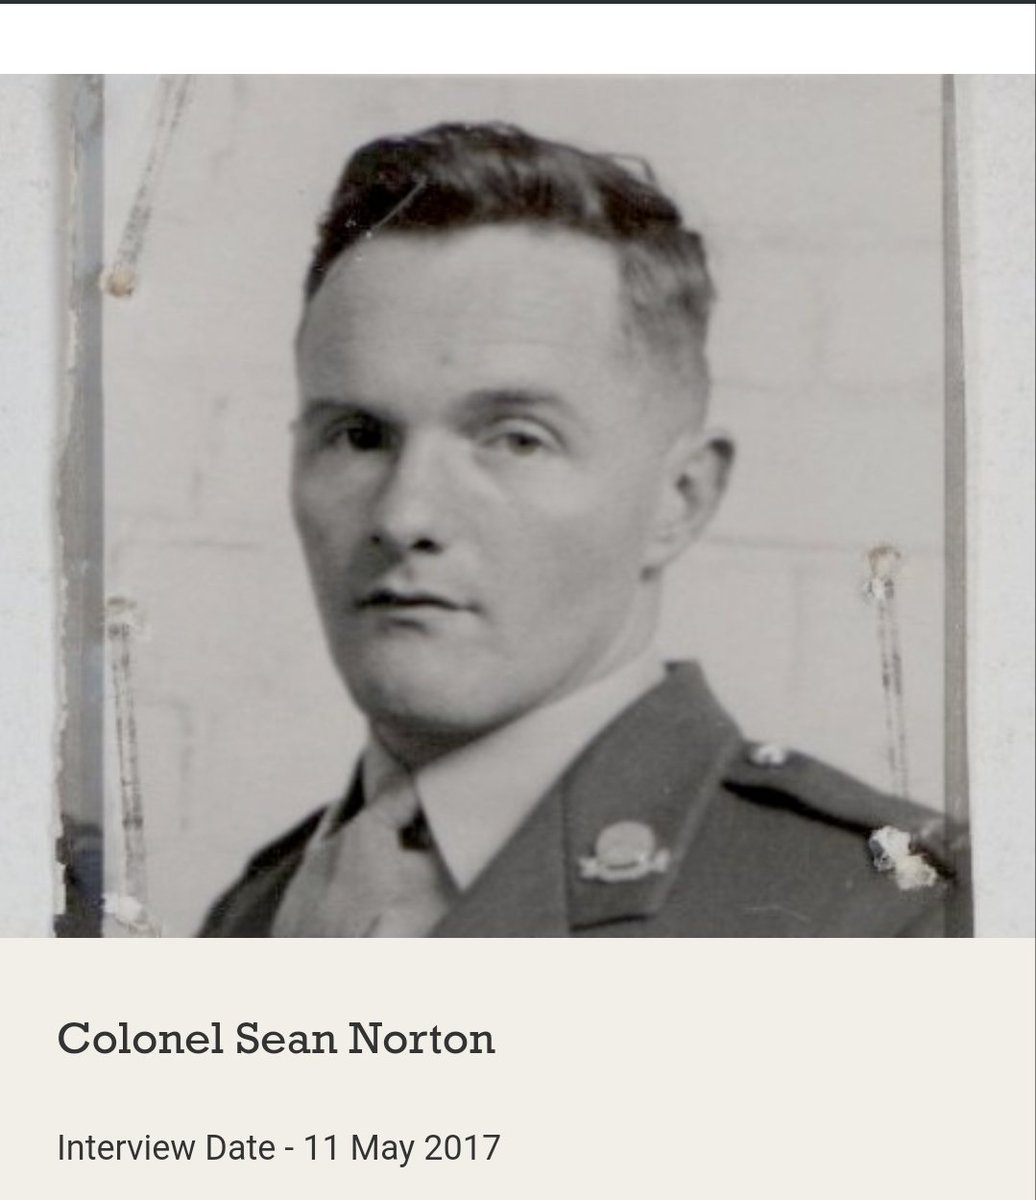 #ExploreYourArchive Day8 is #SportingArchives. Here is a clip from our Oral History Project of Retired Col. Seán Norton, remembering running against Olympic Gold Medallist Ronnie Delaney(late 1940s) bit.ly/2QGeBjf. The Collection can be found here bit.ly/2B4LxfS